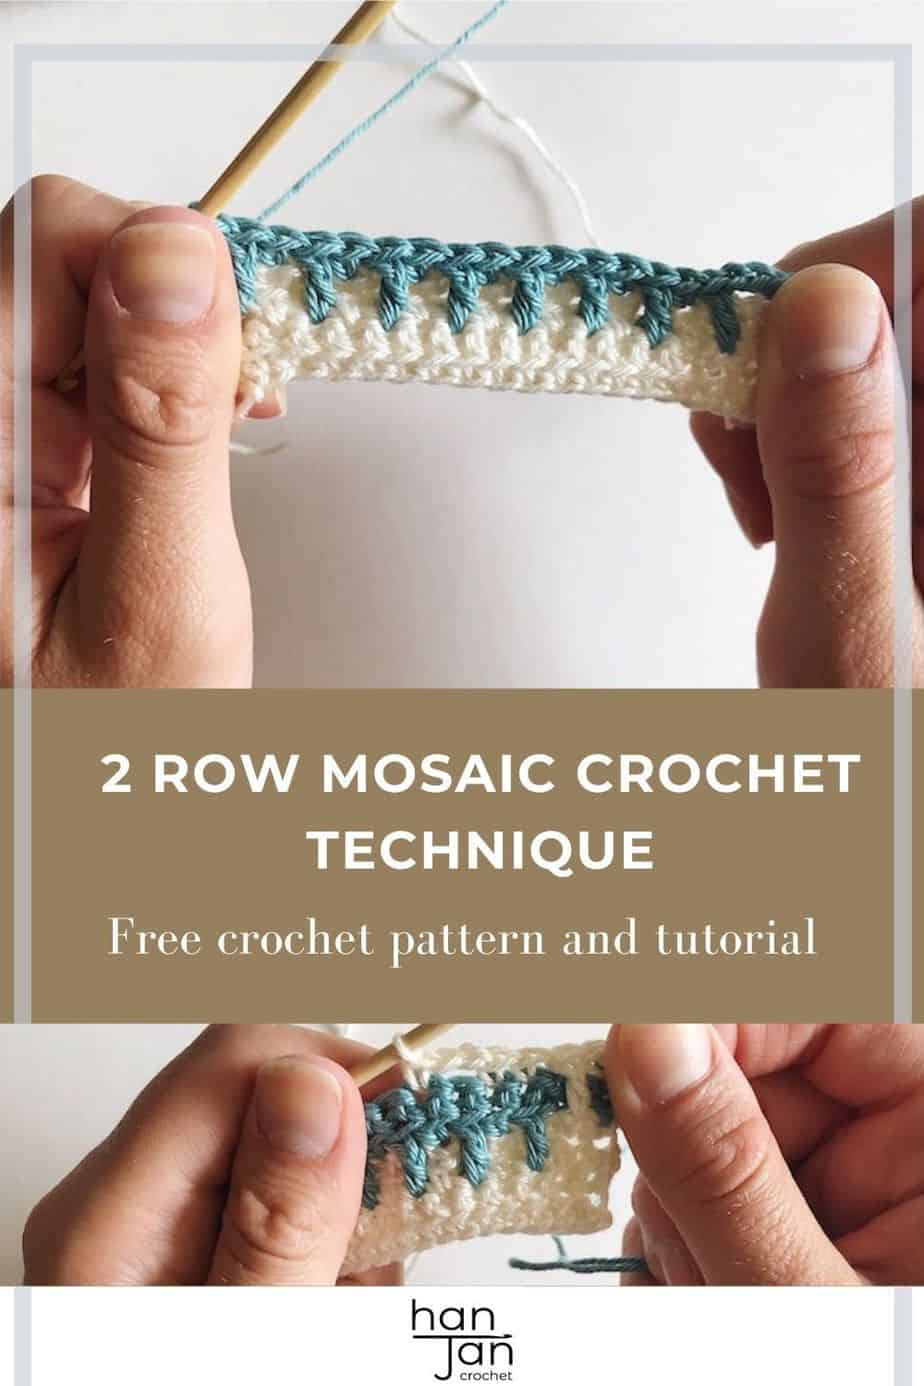 hands holding a sample of mosaic crochet in blue and white yarn with crochet hook